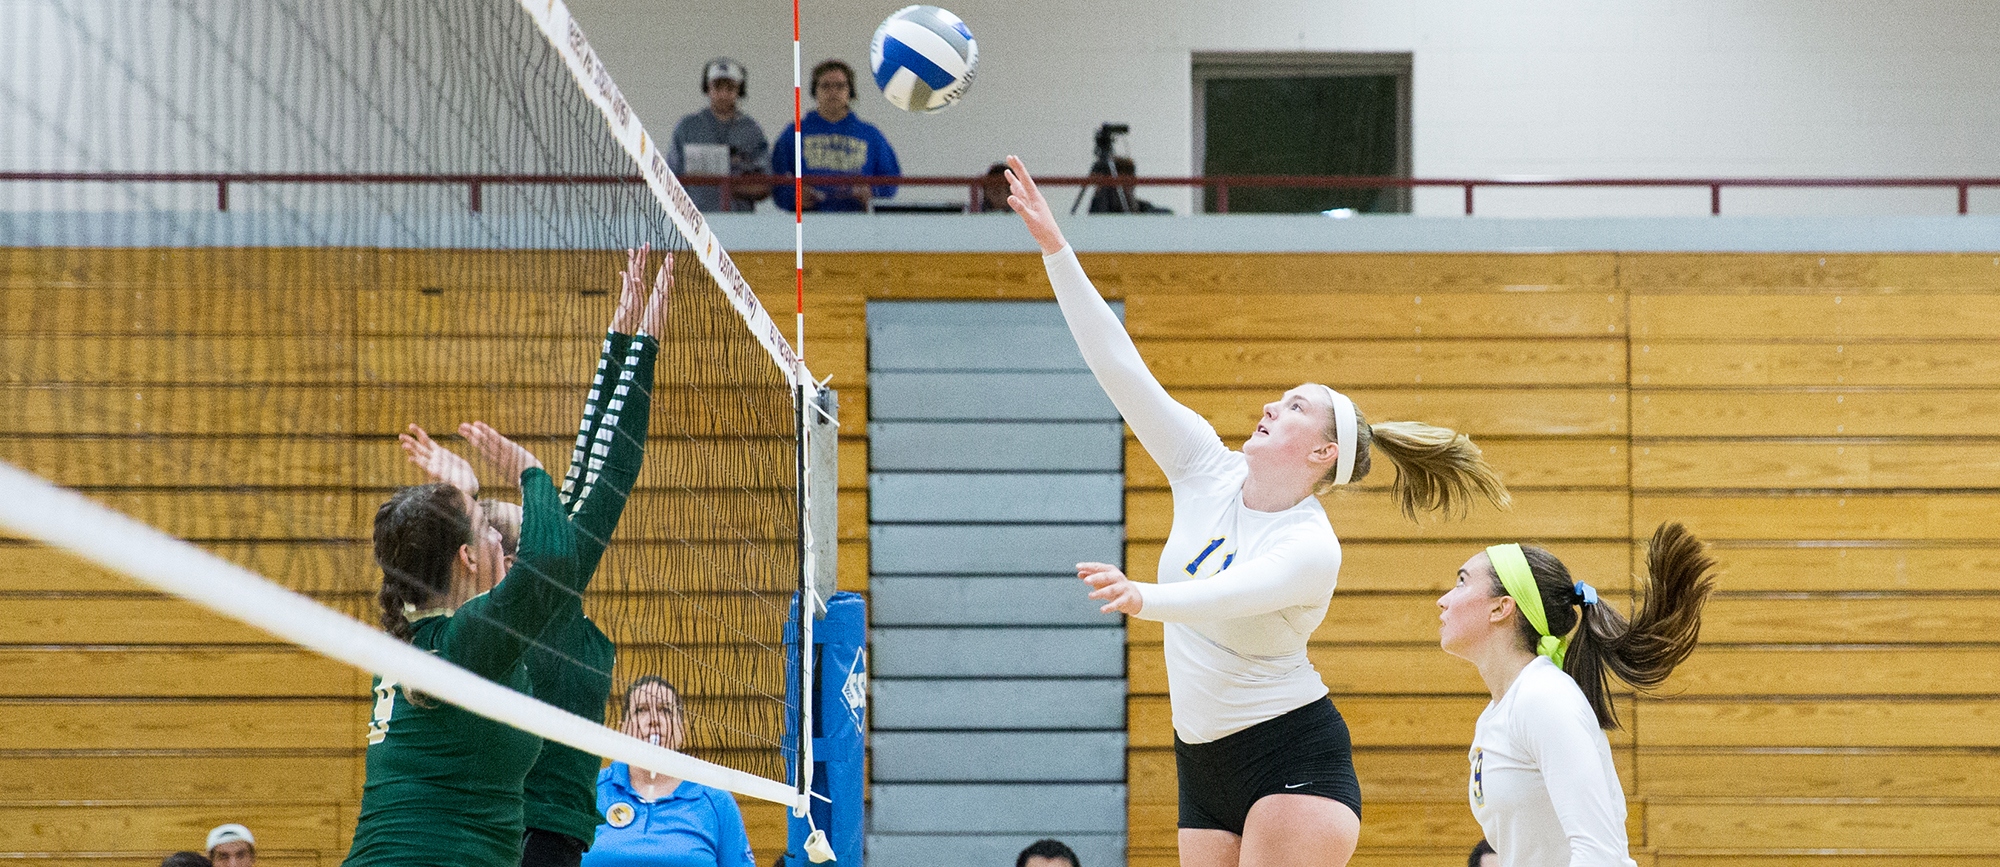 Junior Cassie Holmes recorded a career-high 14 kills in Western New England's 3-1 win at Mount Holyoke on Friday night. (Photo by Chris Marion)